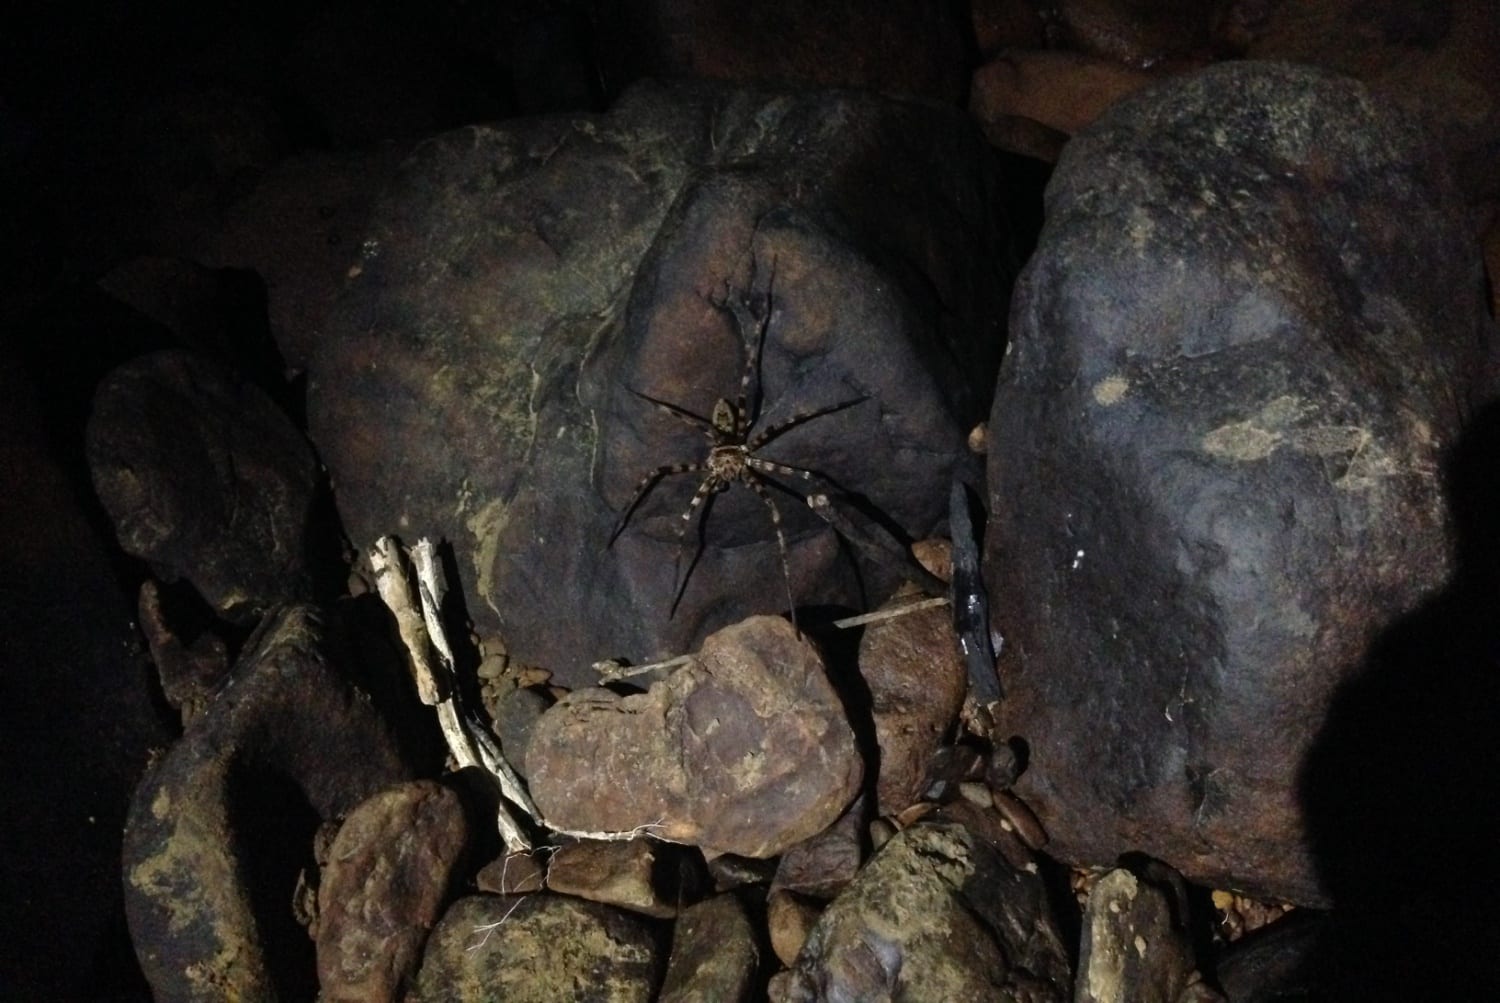 A beautiful, harmless, cave spider roaming in Khao Sok park